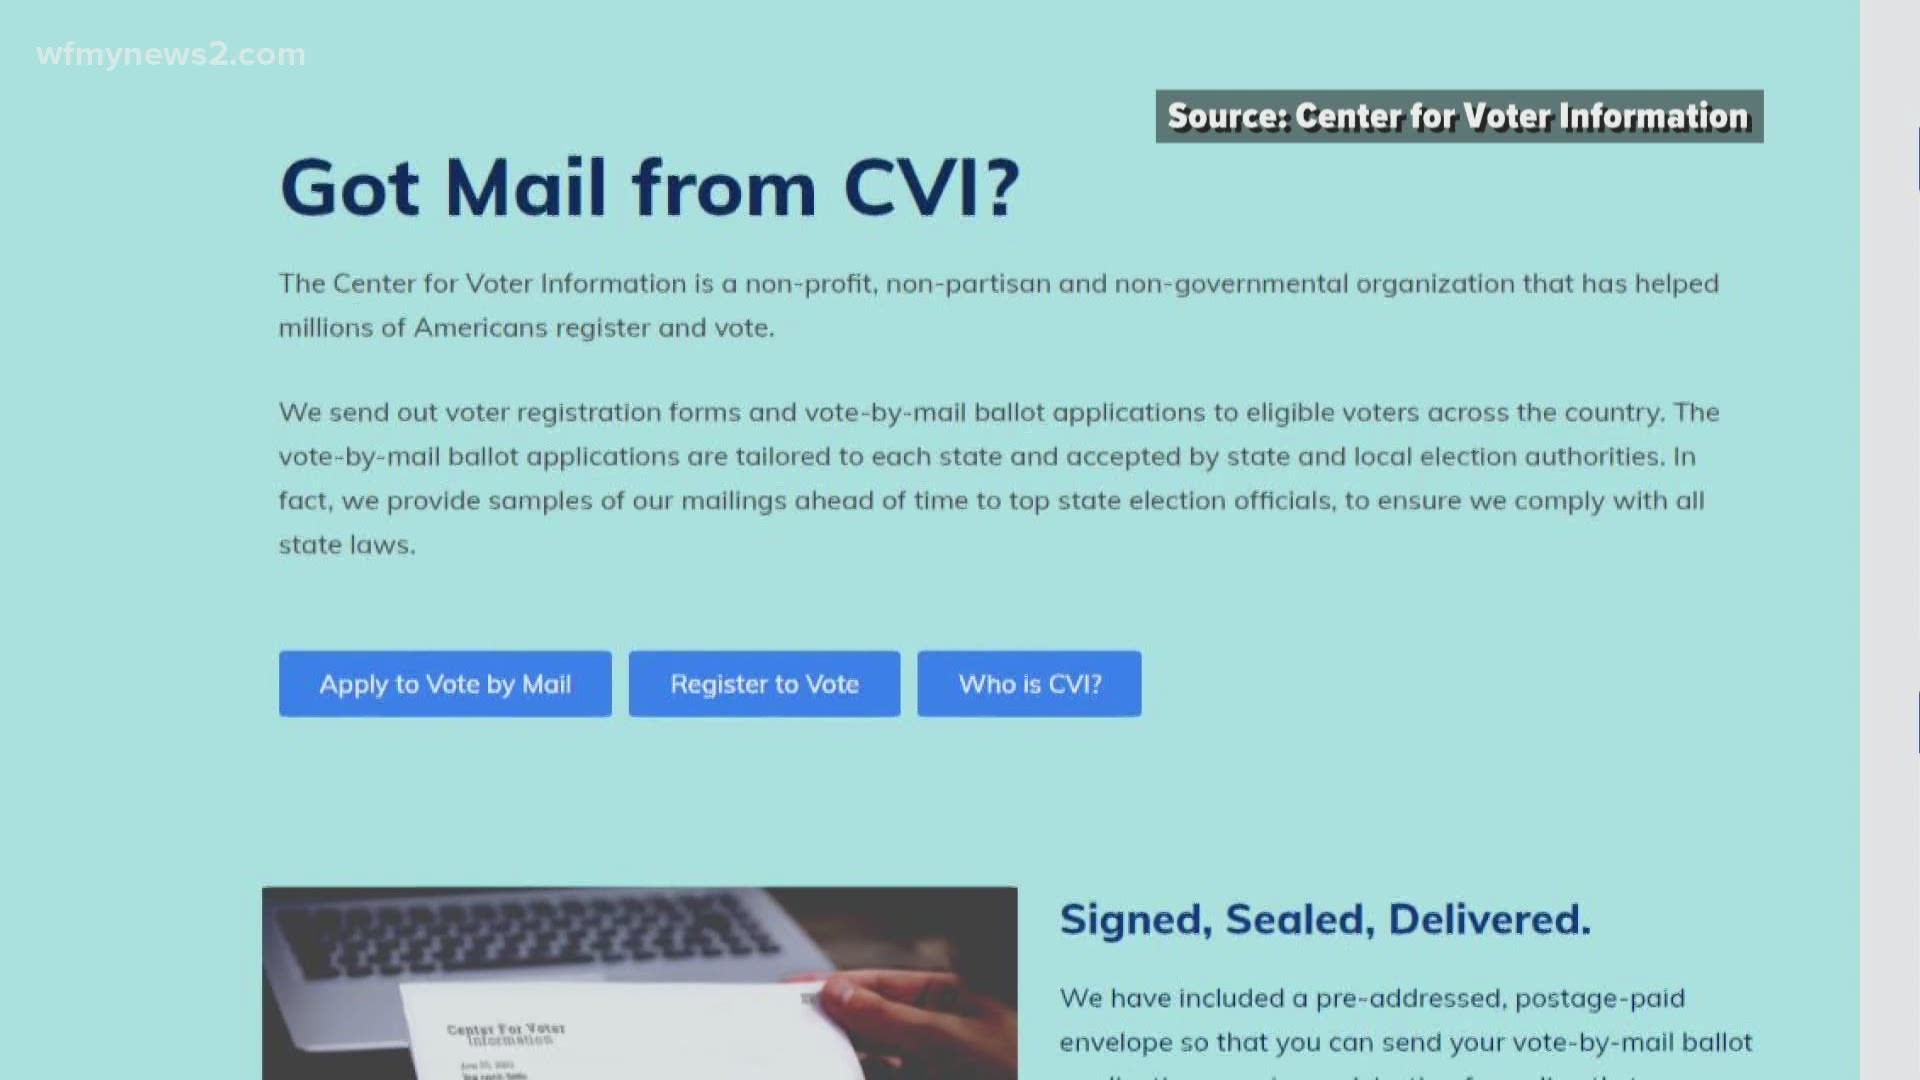 The Centers for Voter Information is sending certain registered voters pre-paid postage with absentee ballot applications.